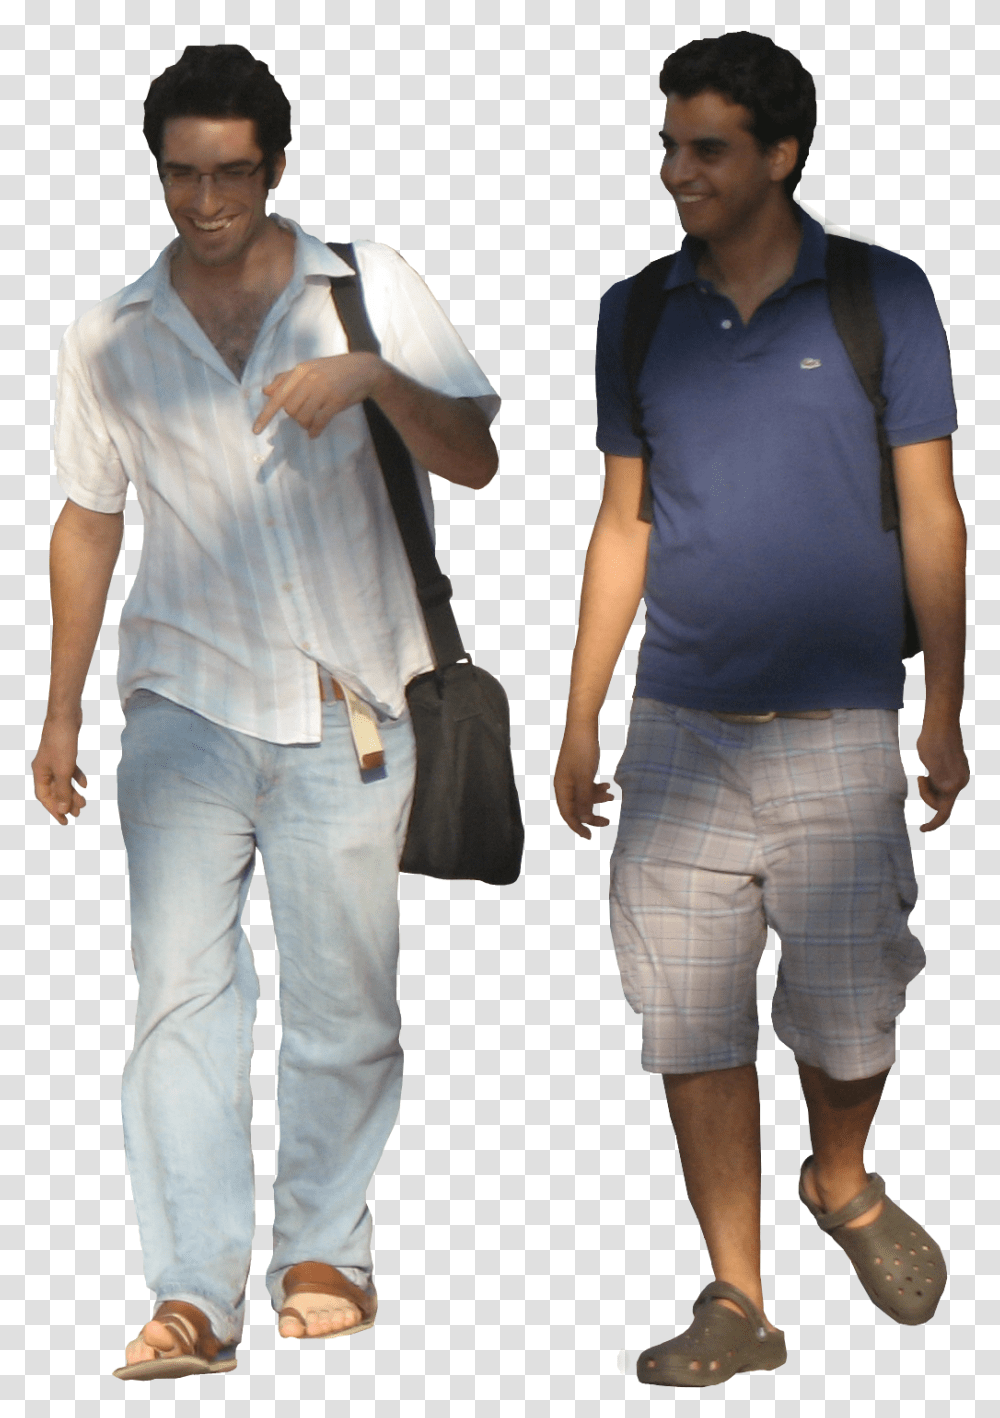 People Walking Front Image People Walking Towards, Person, Clothing, Sleeve, Shorts Transparent Png